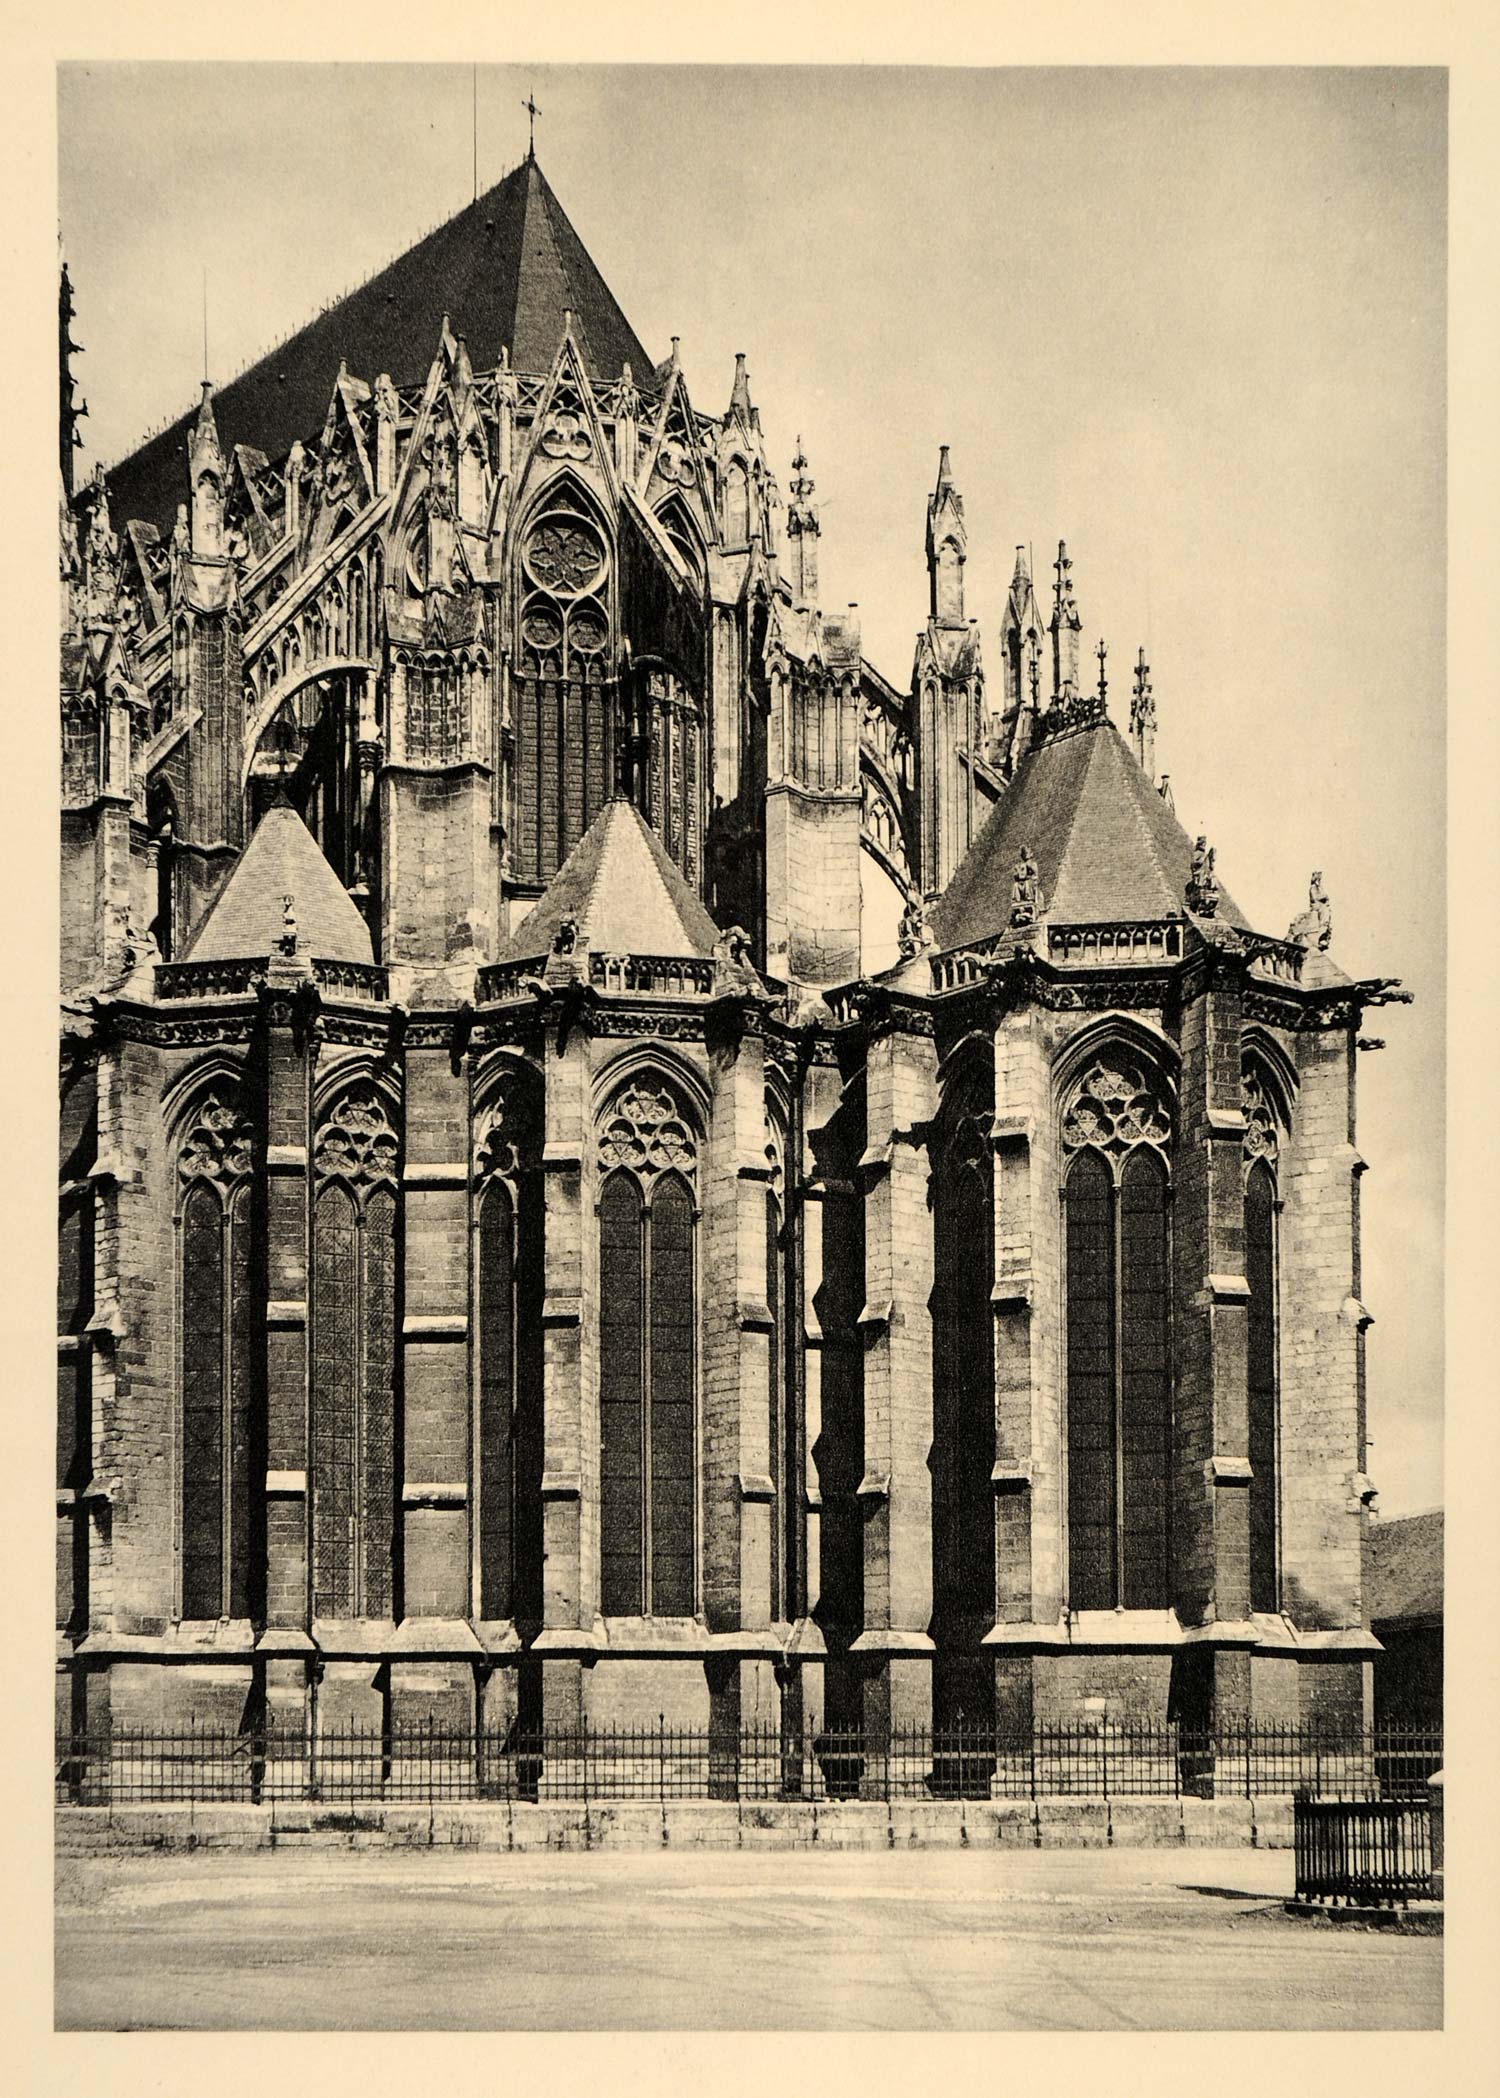 Chartres Cathedral: Scale Architectual Paper Model (French Edition)